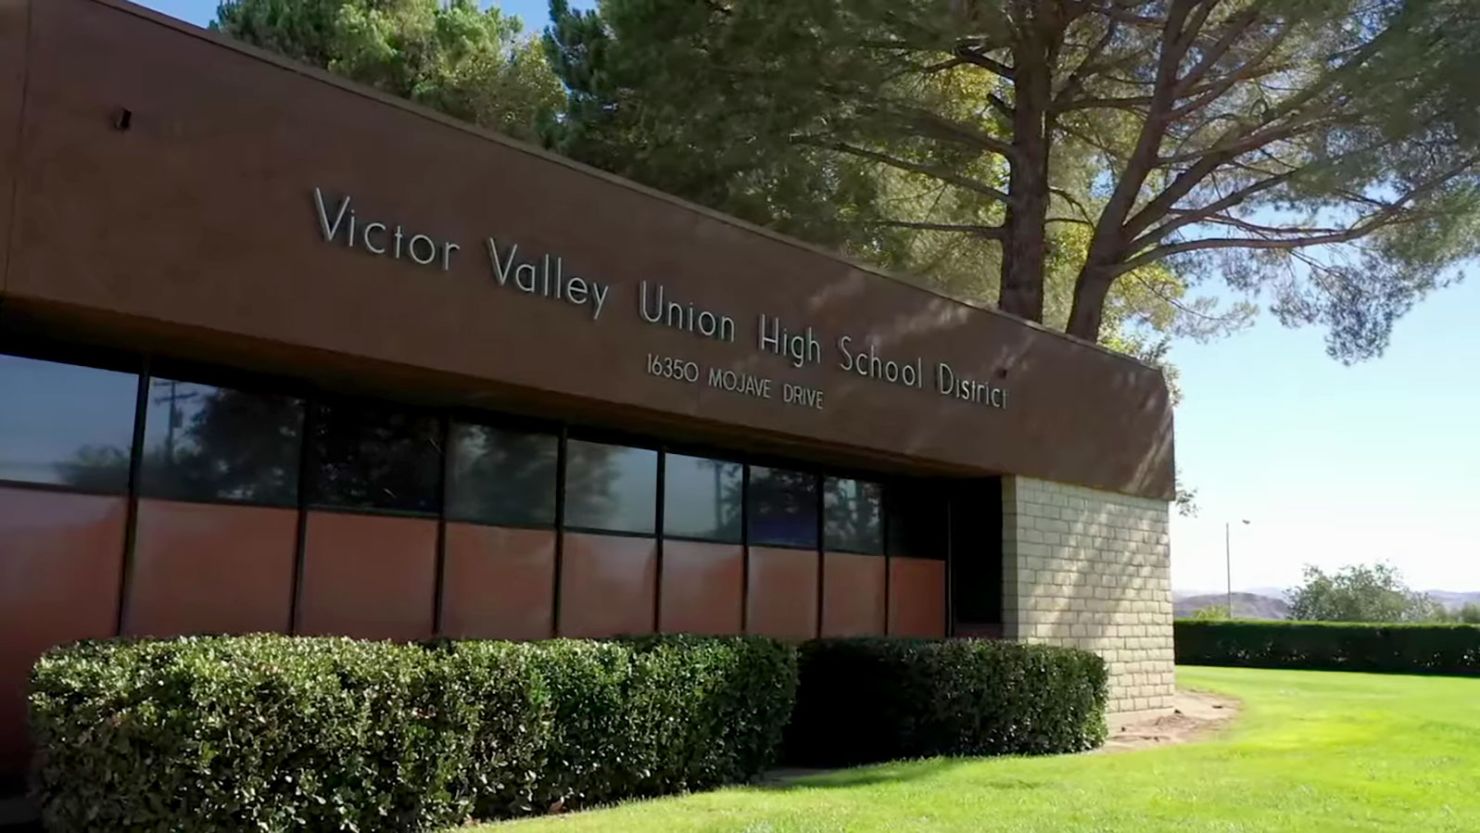 A Victor Valley Union High School District building.